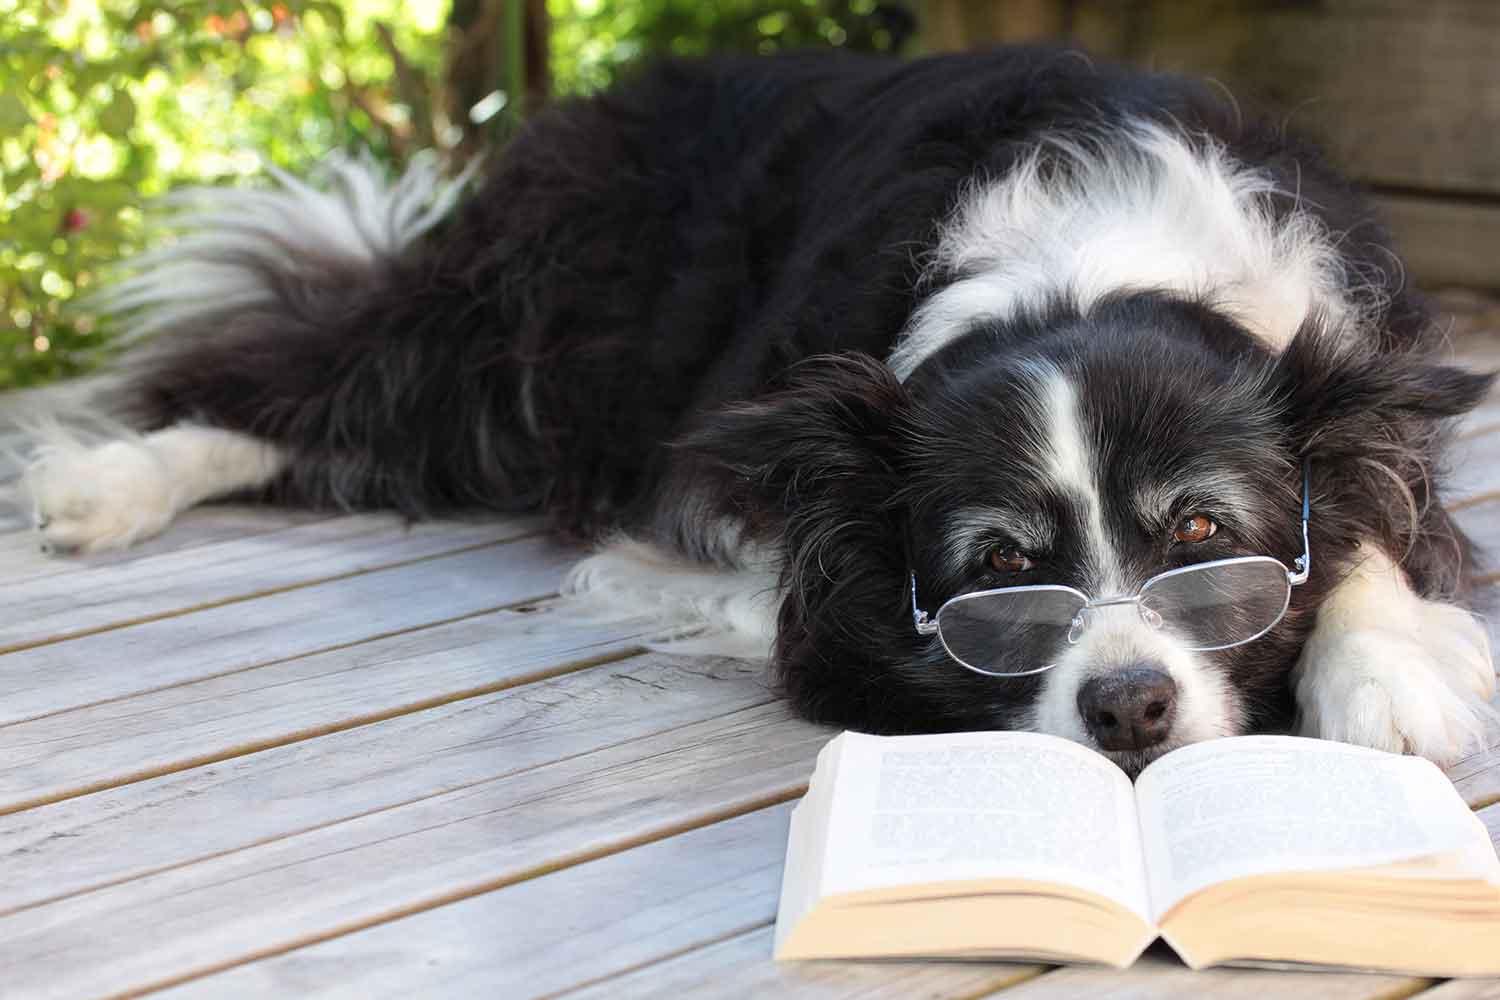 A border collie wearing glasses lies on an outdoor deck with a book in front of it